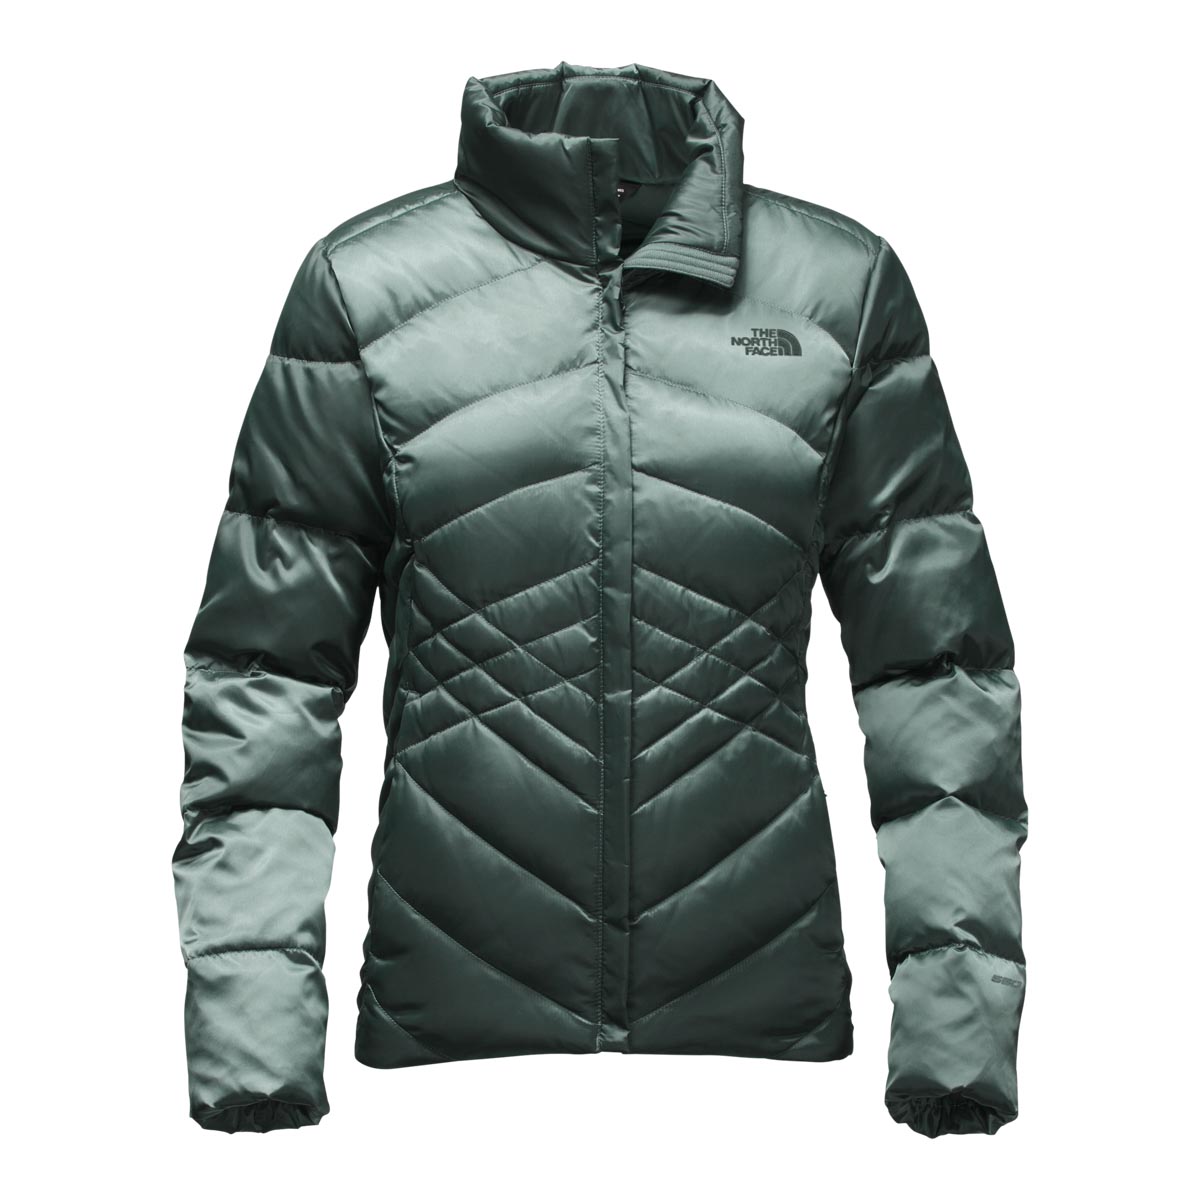 The North Face Womens Aconcagua Jacket Discontinued Pricing